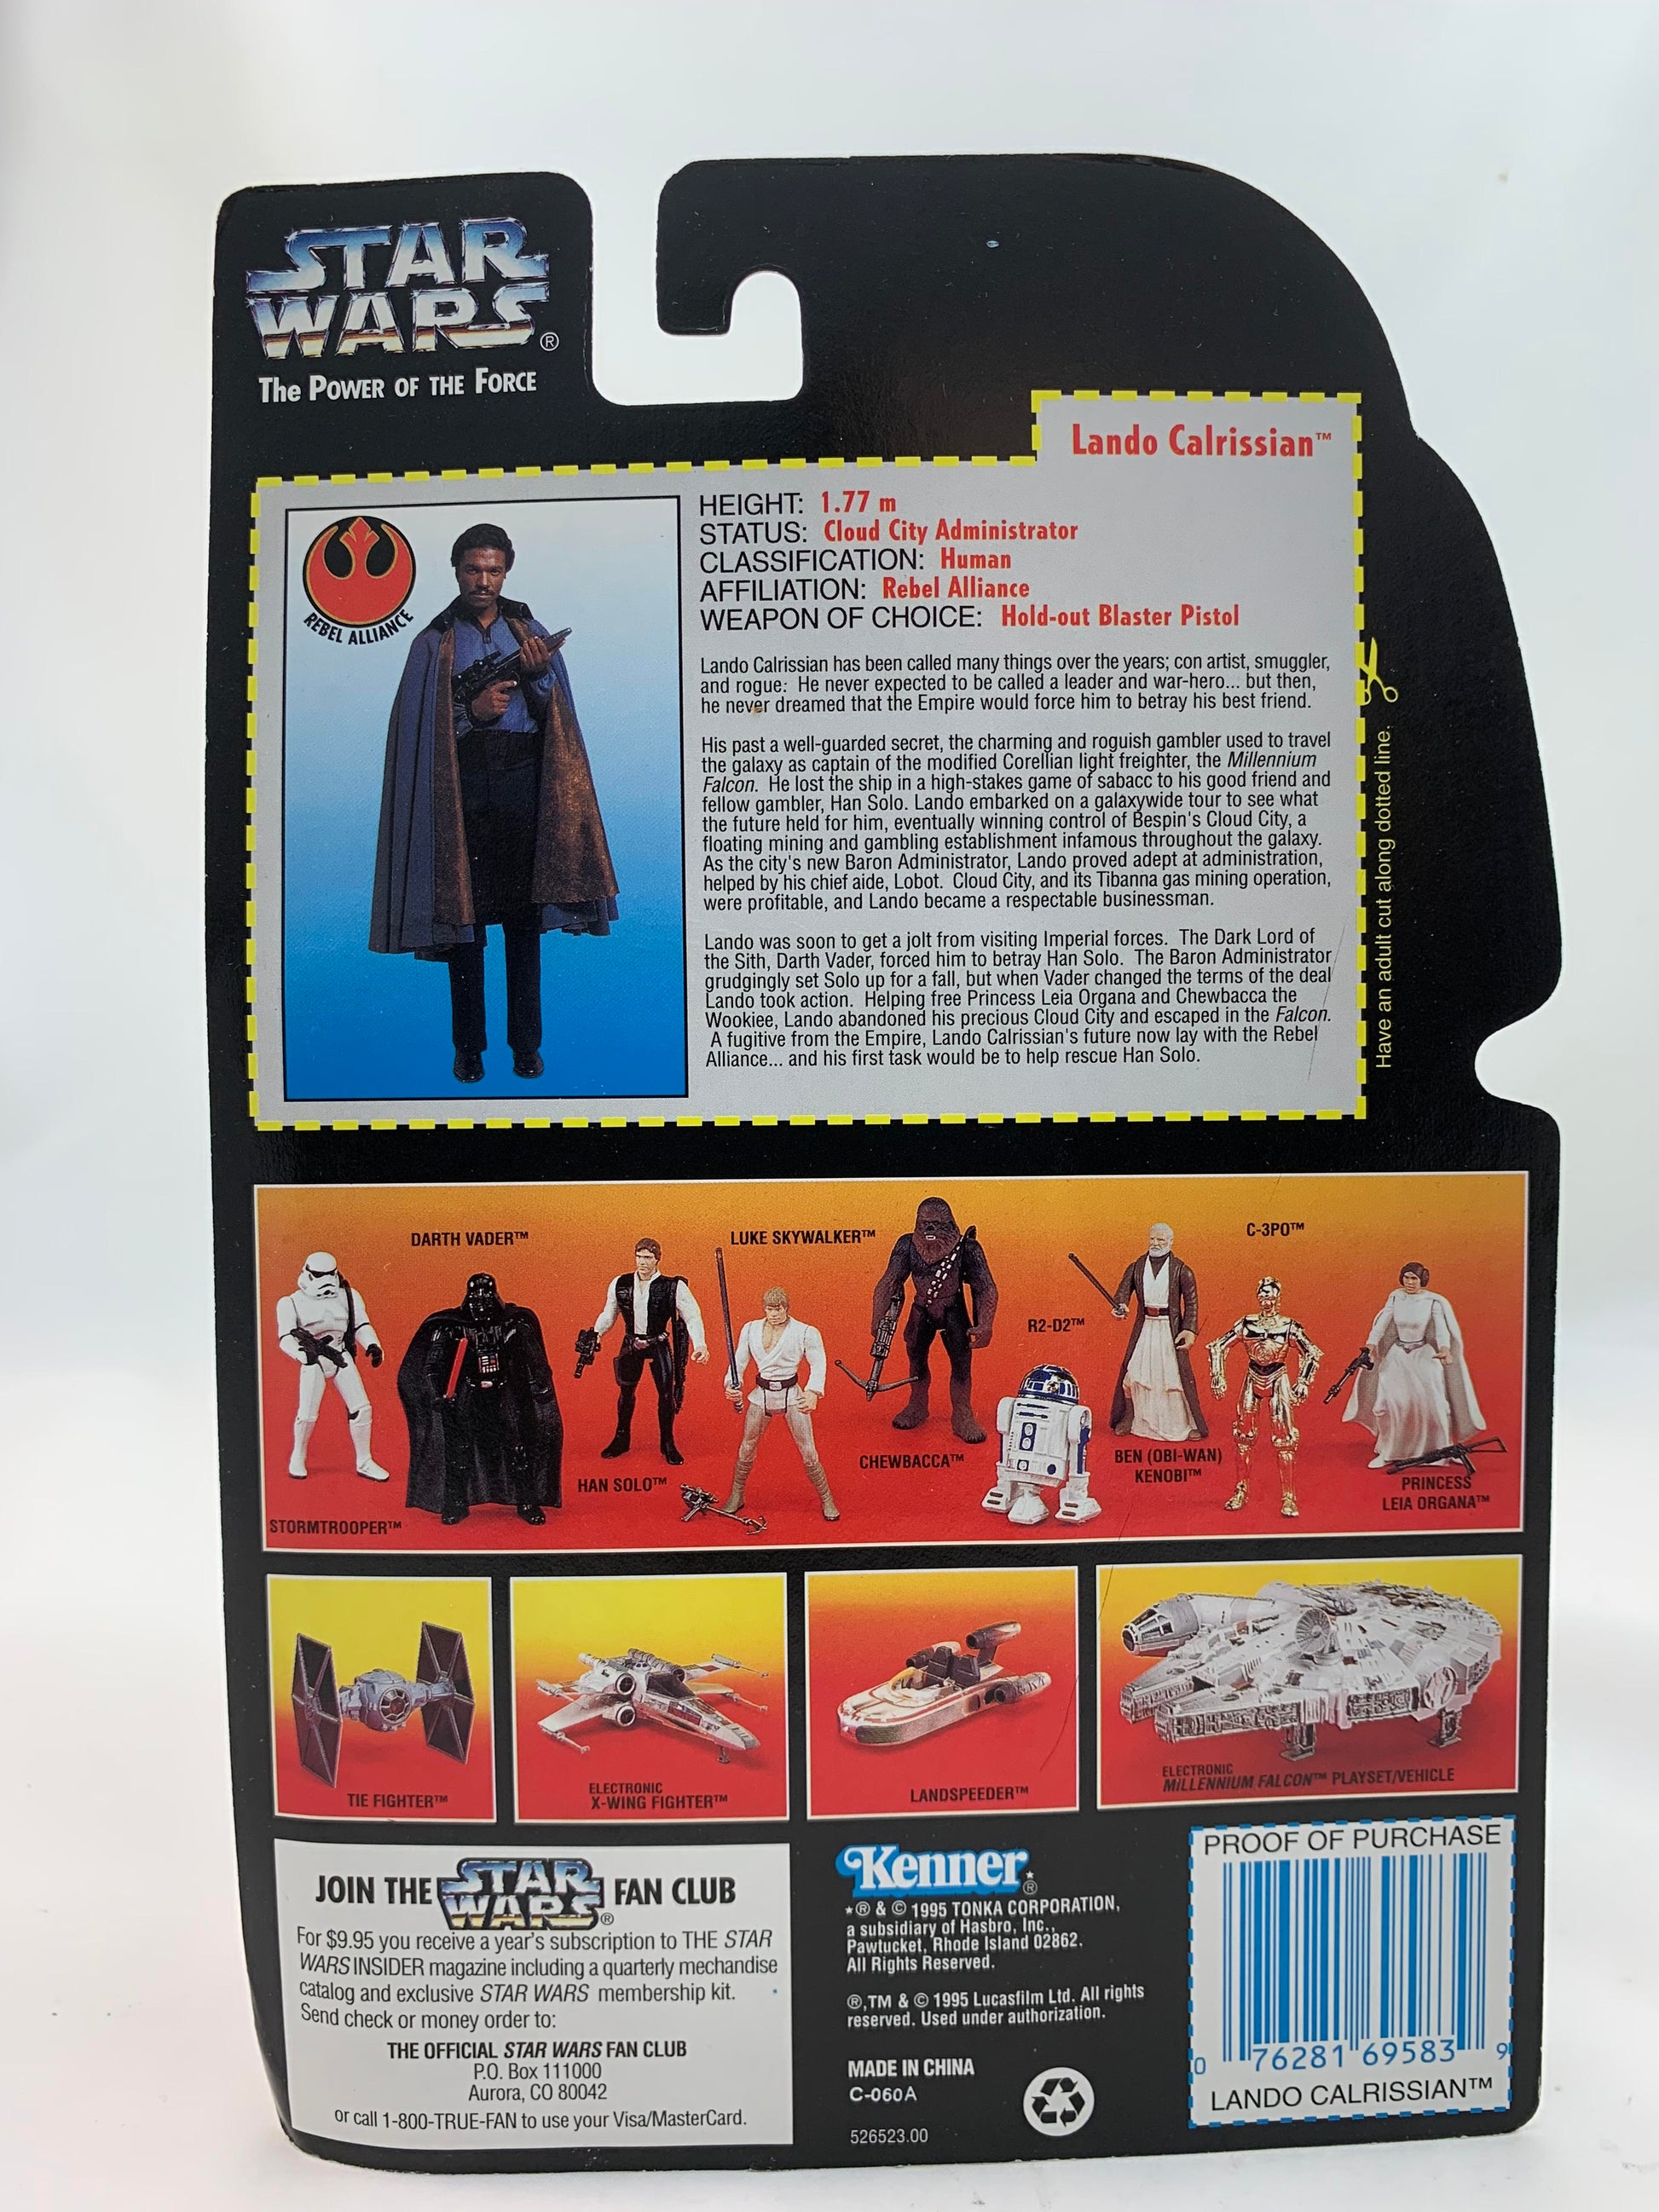 Kenner Hasbro Red Card Star Wars Power Of The Force 2 Lando Calrissian1995 - MOC